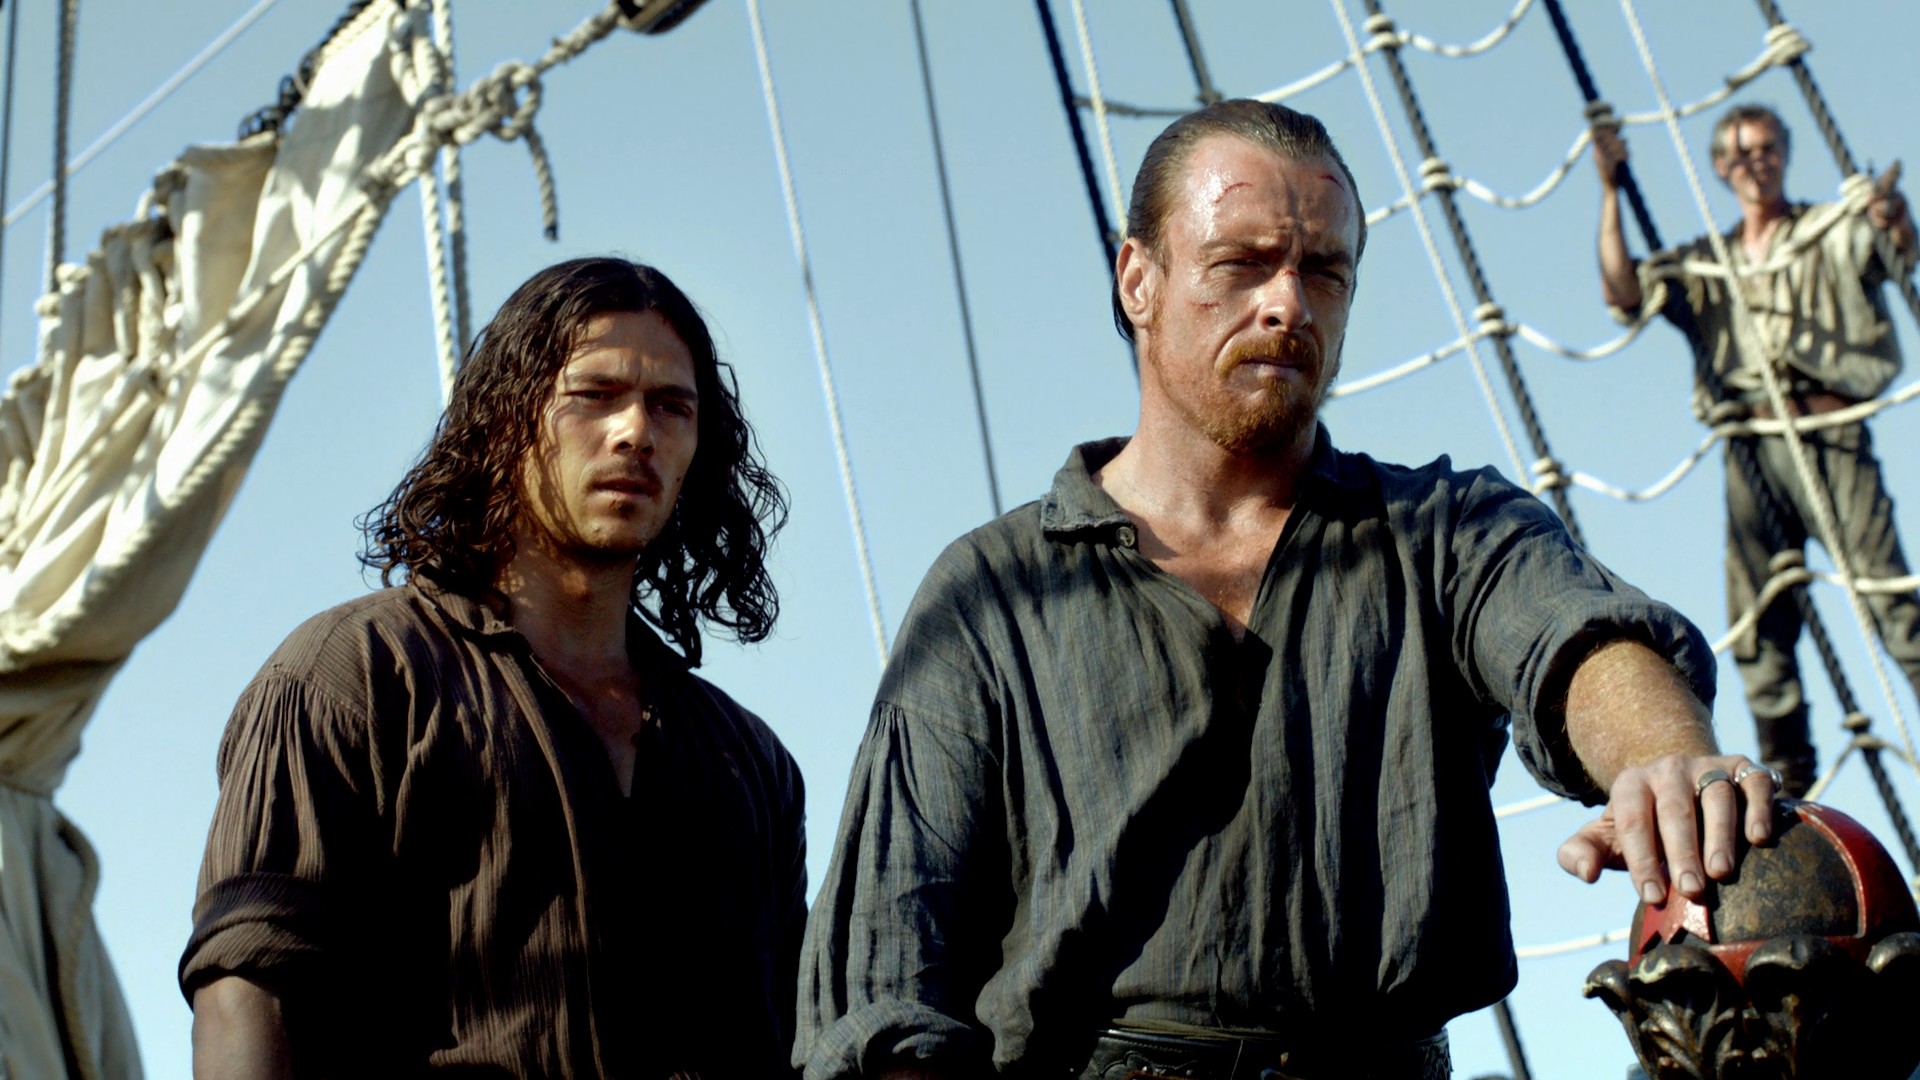 1920x1080 The Video: Sizing Up the Picture. 'Black Sails' ...